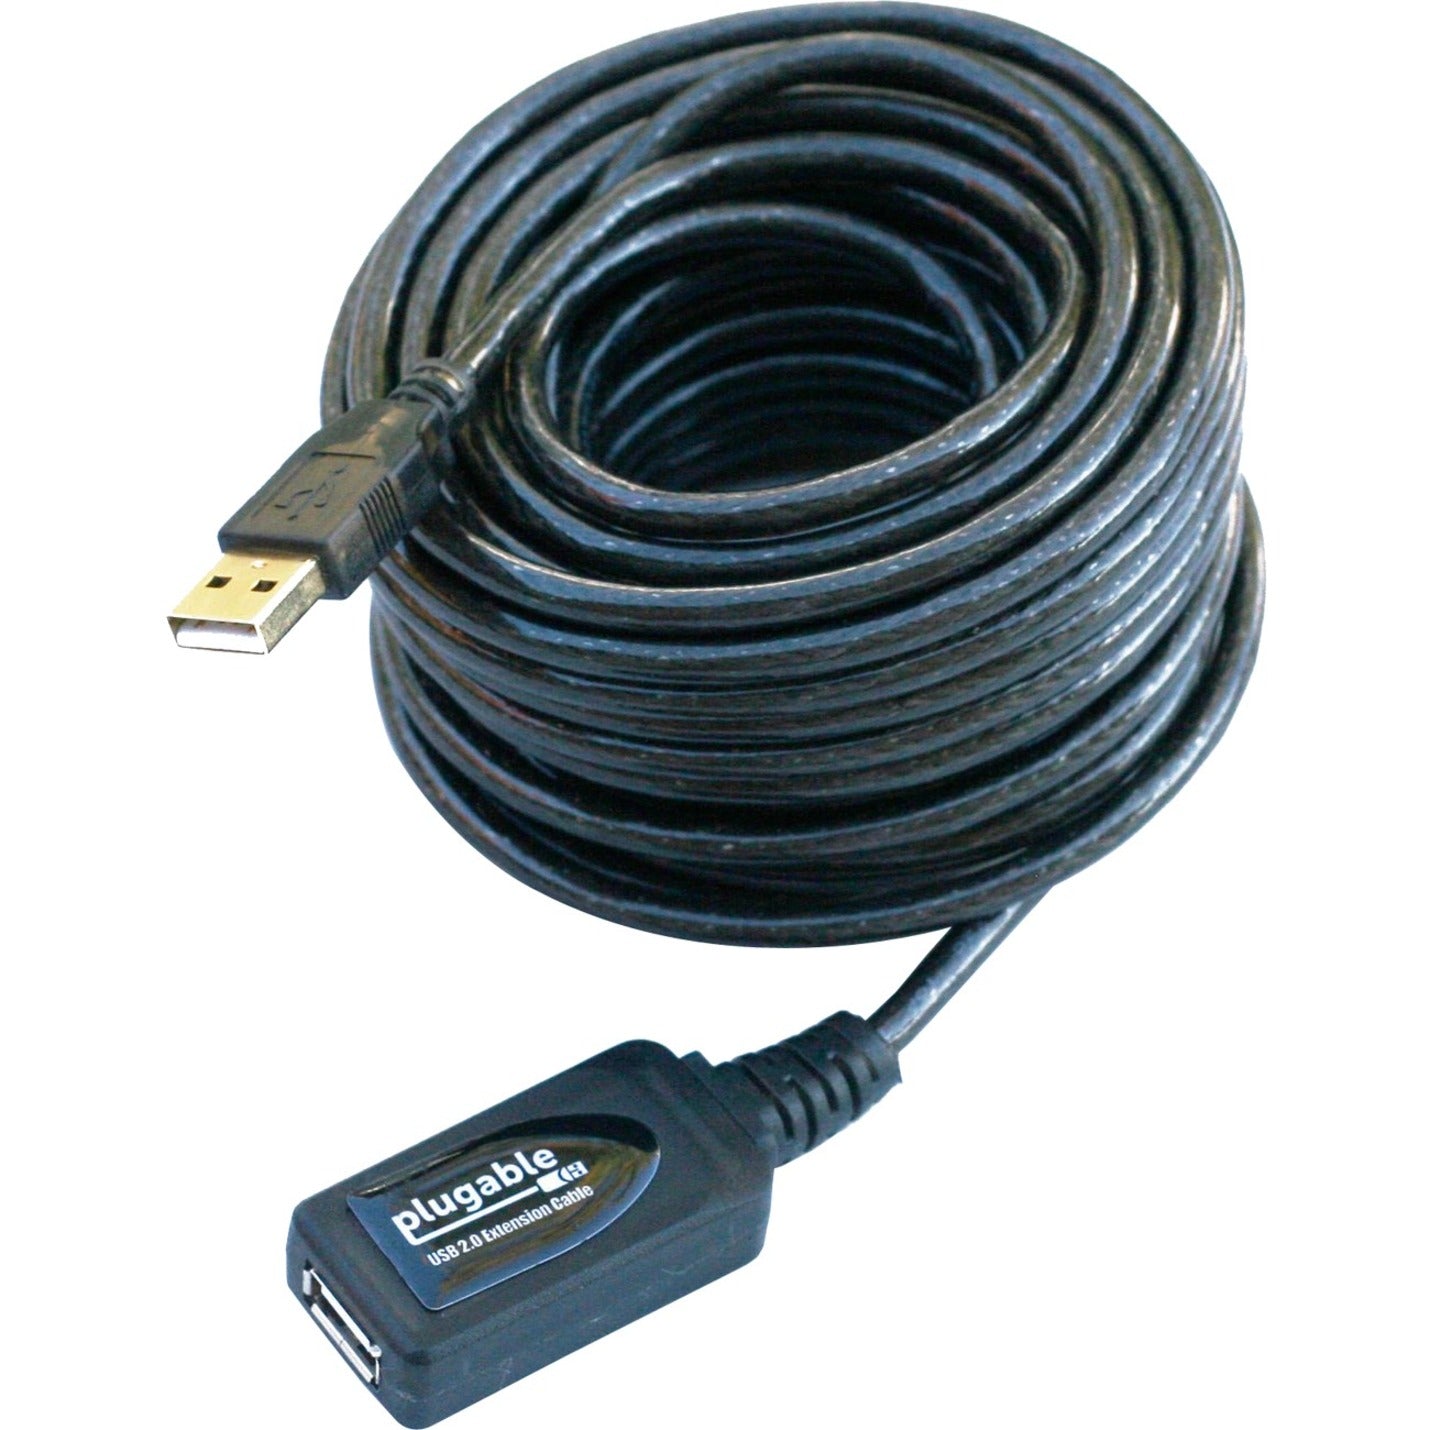 Plugable USB2-10M USB 2.0 Active Extension Cable (10m/32ft), Repeater, 480 Mbit/s Data Transfer Rate